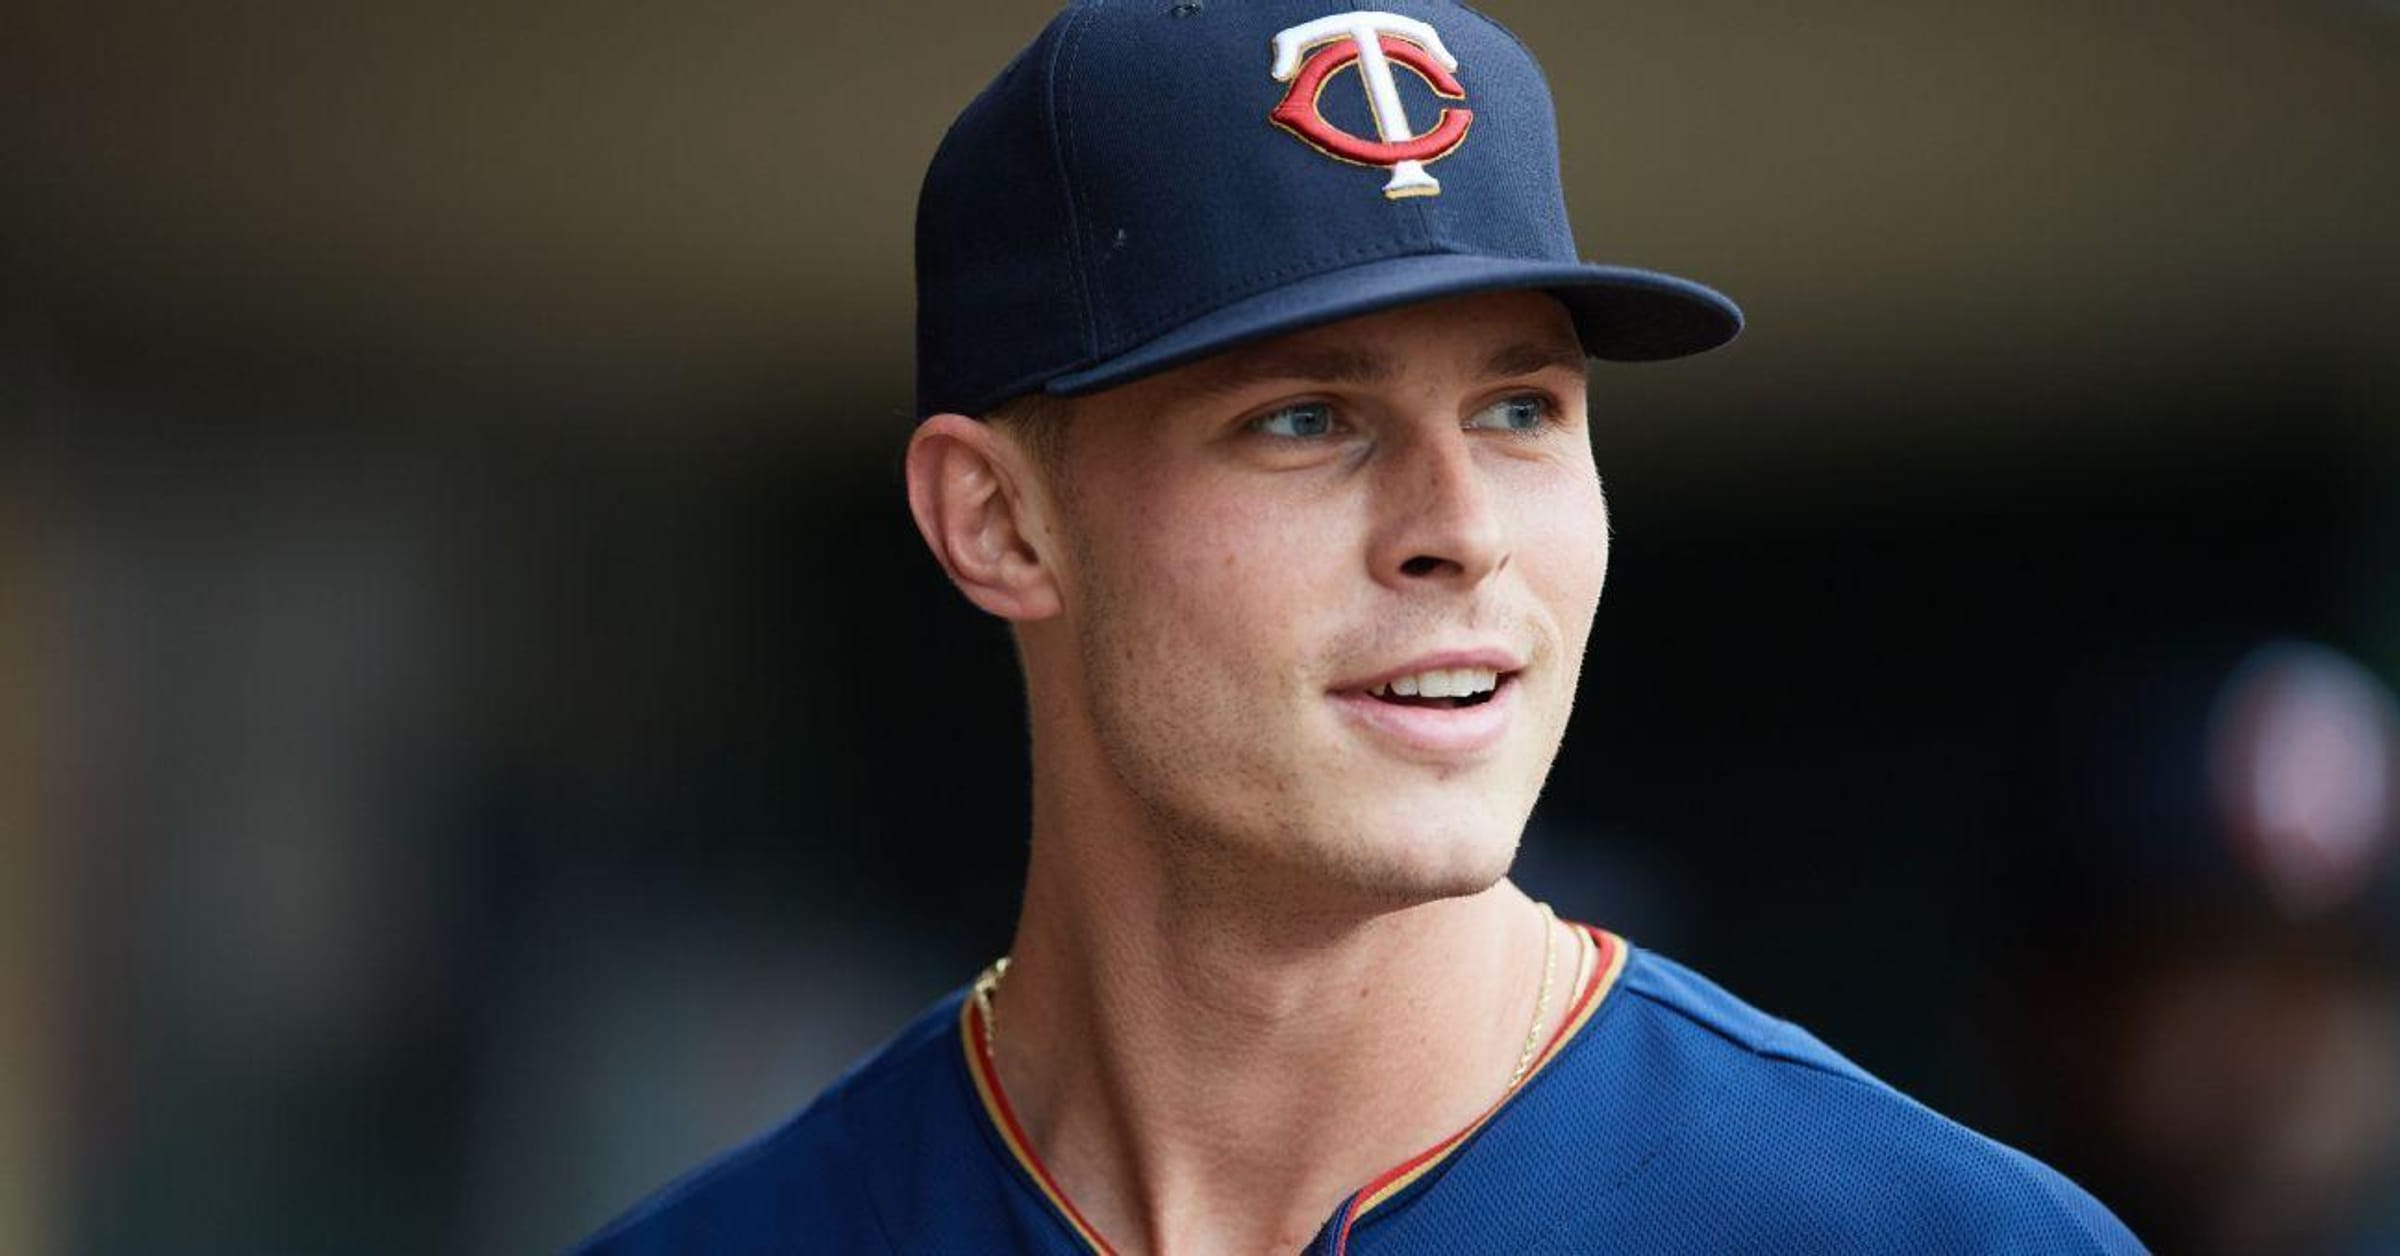 Boys Of Summer: The Hottest Players In The MLB